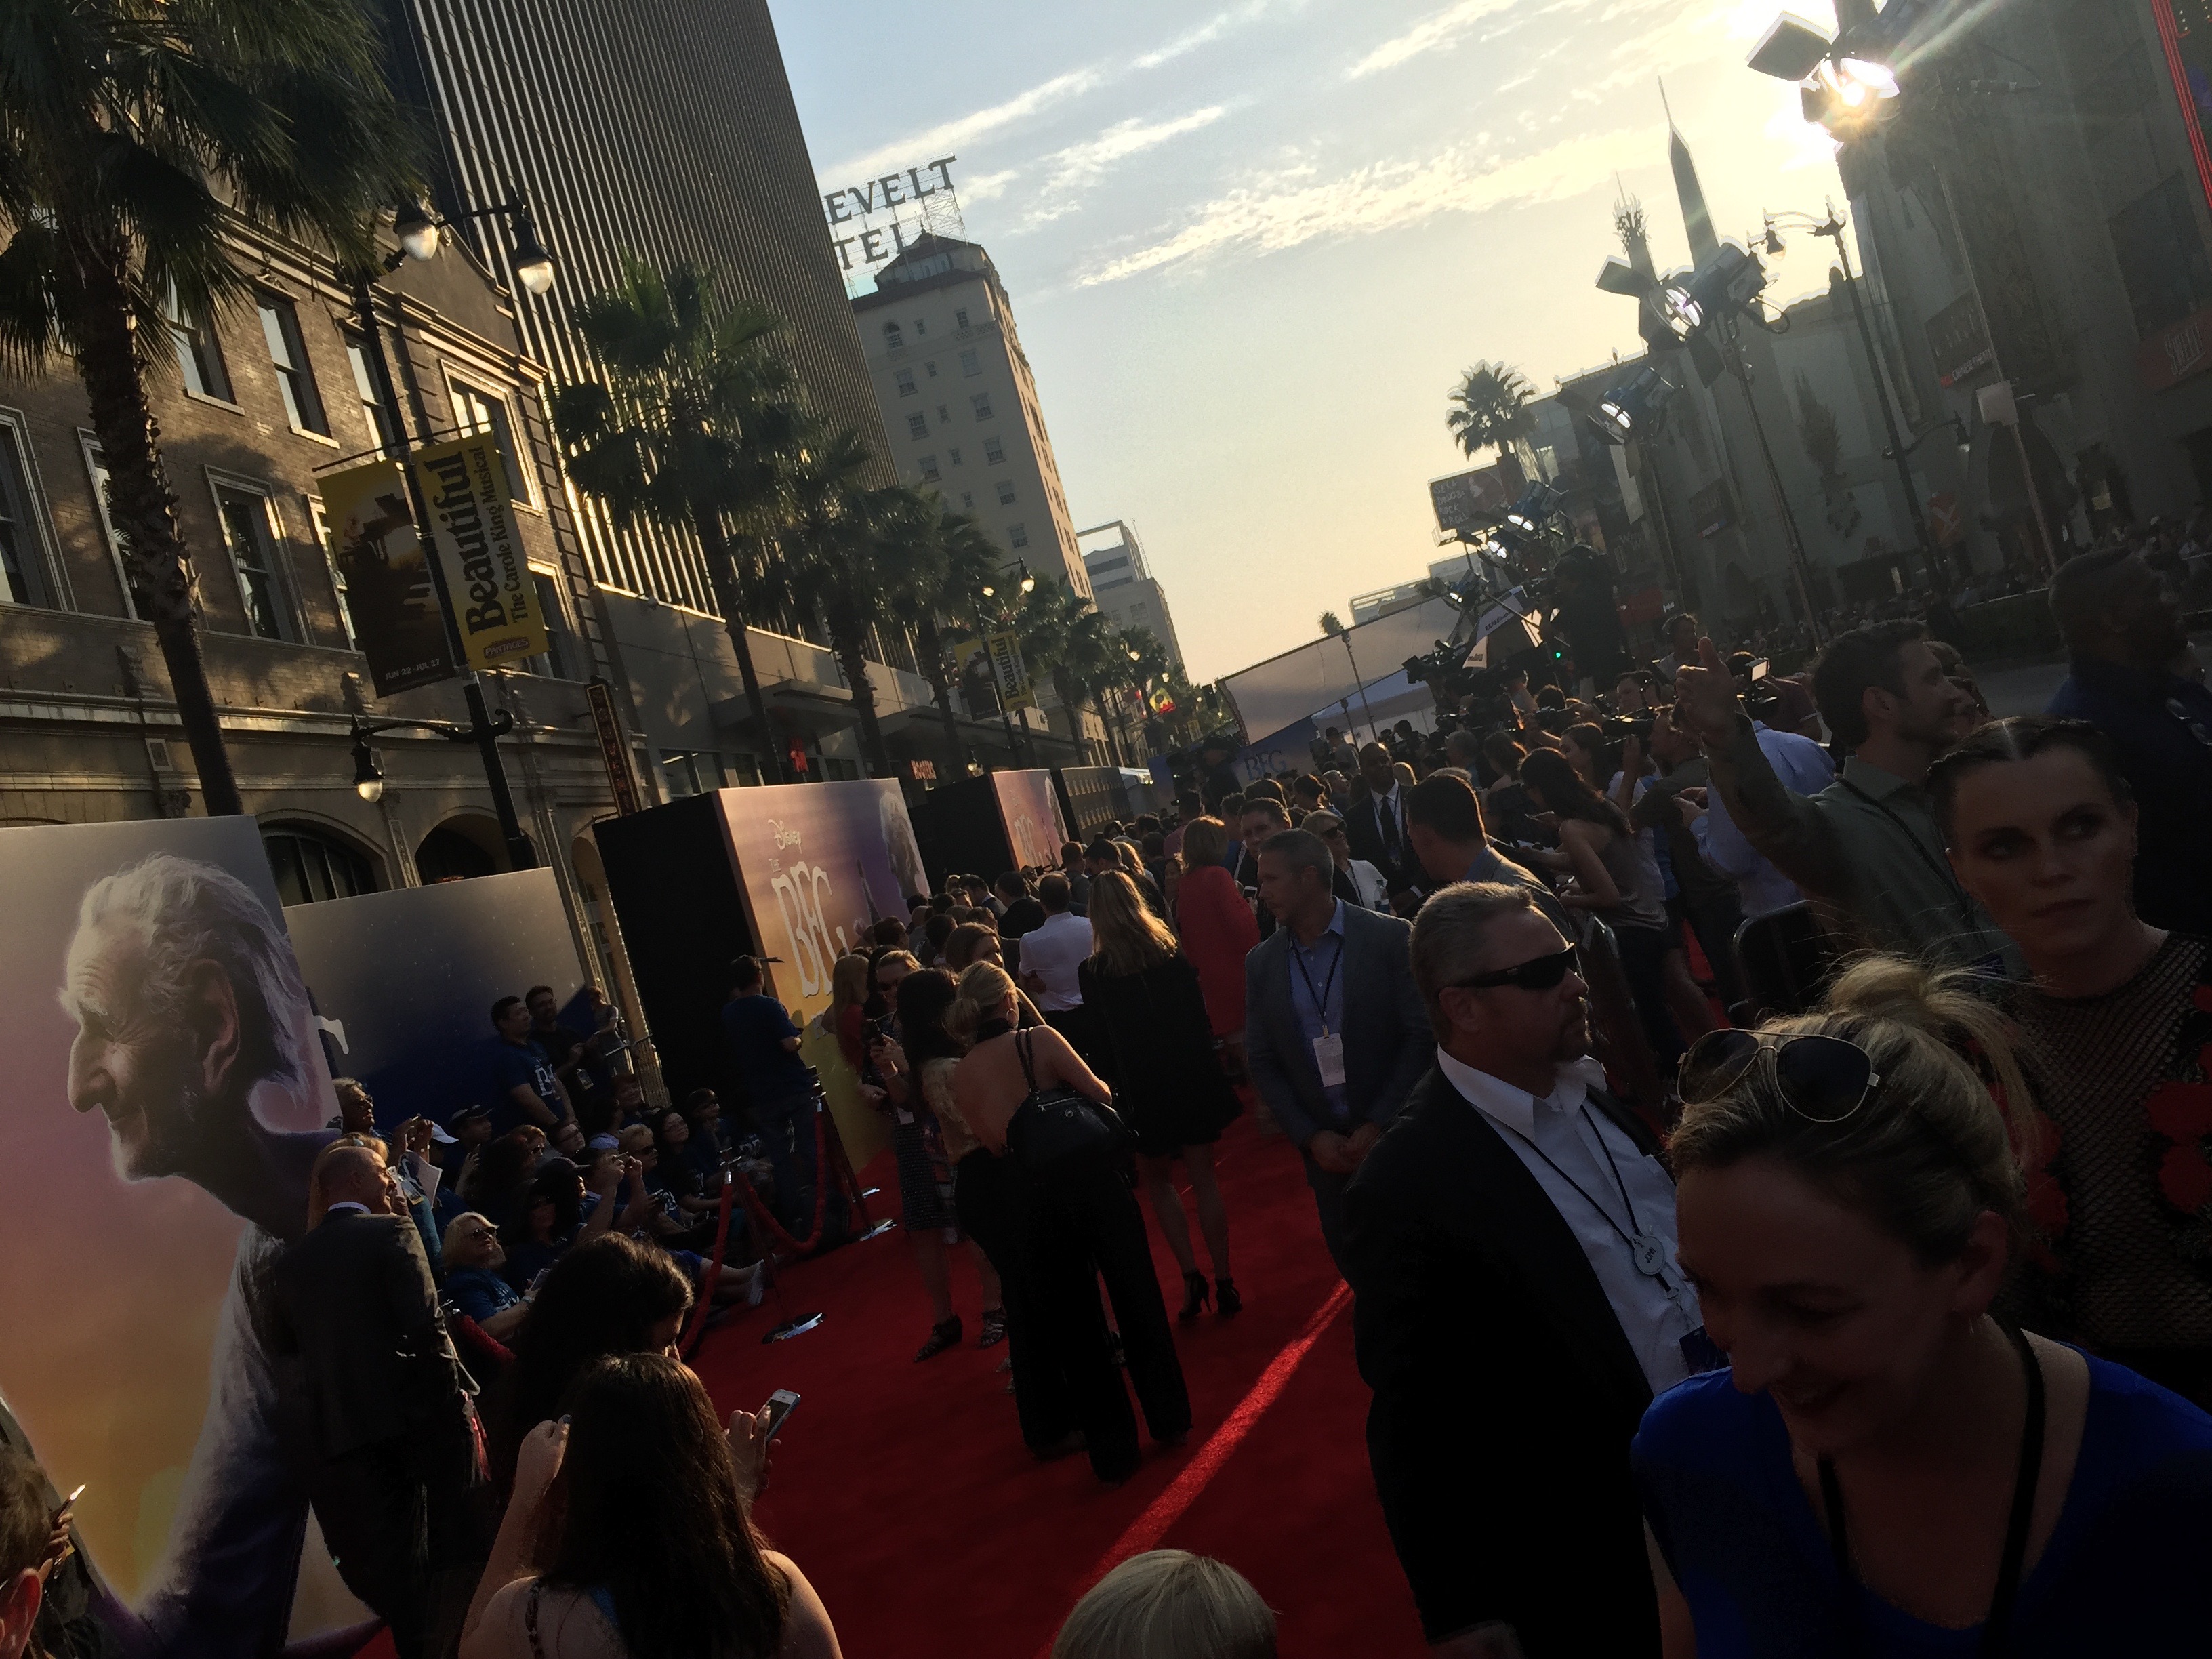 The BFG Red Carpet premiere in Hollywood. Perspective from a first timer #TheBFGEvent